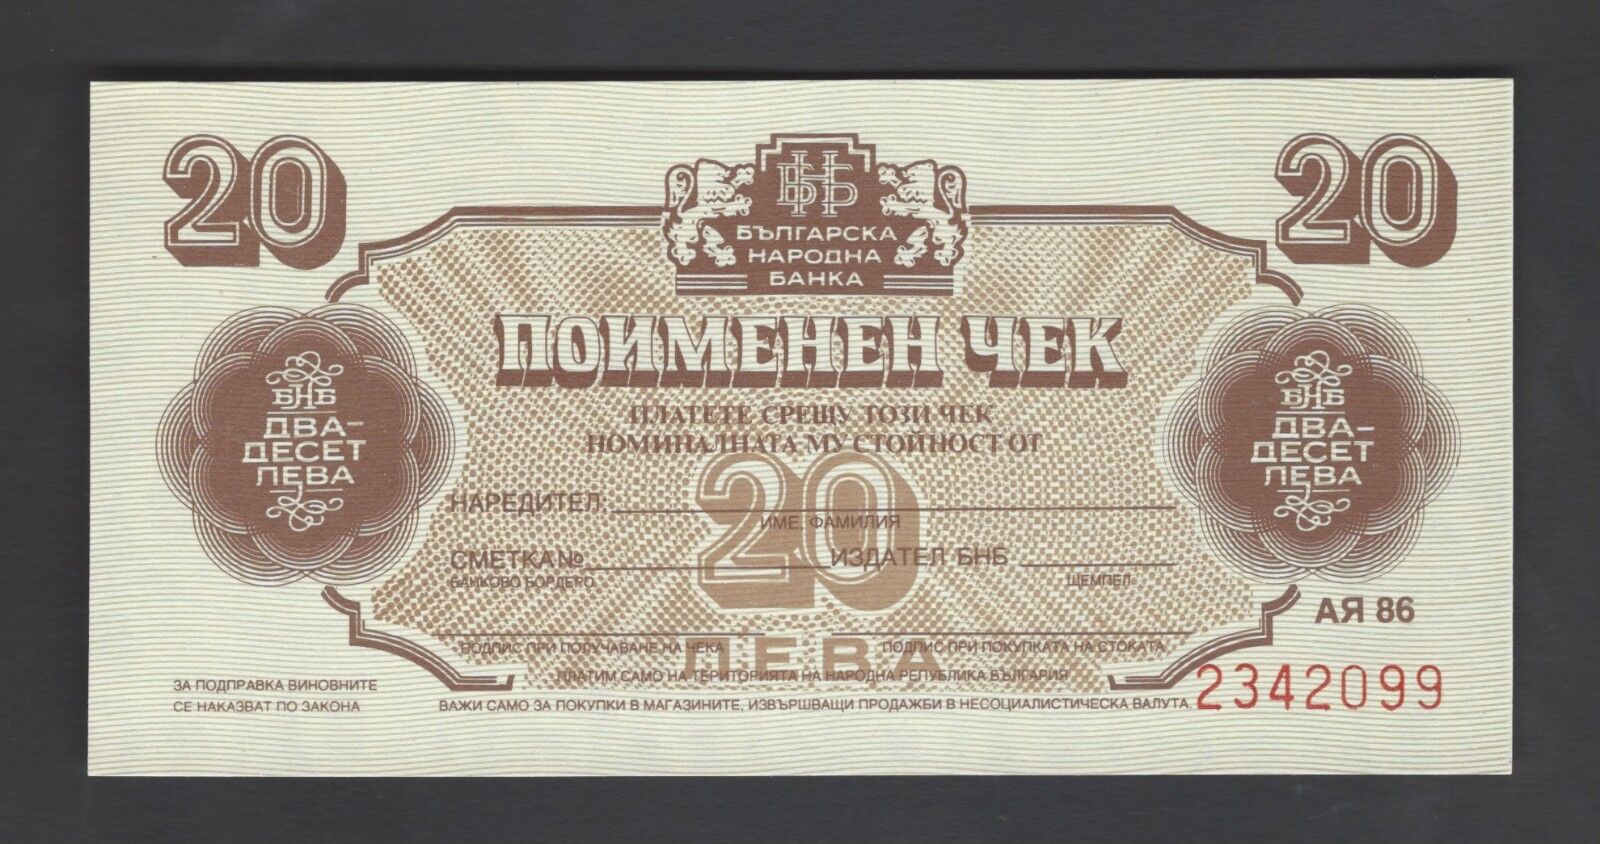 Bulgaria Paper Money Bank cheque Banknote 1-100 FX36-FX42 Not Used Uncirculated 